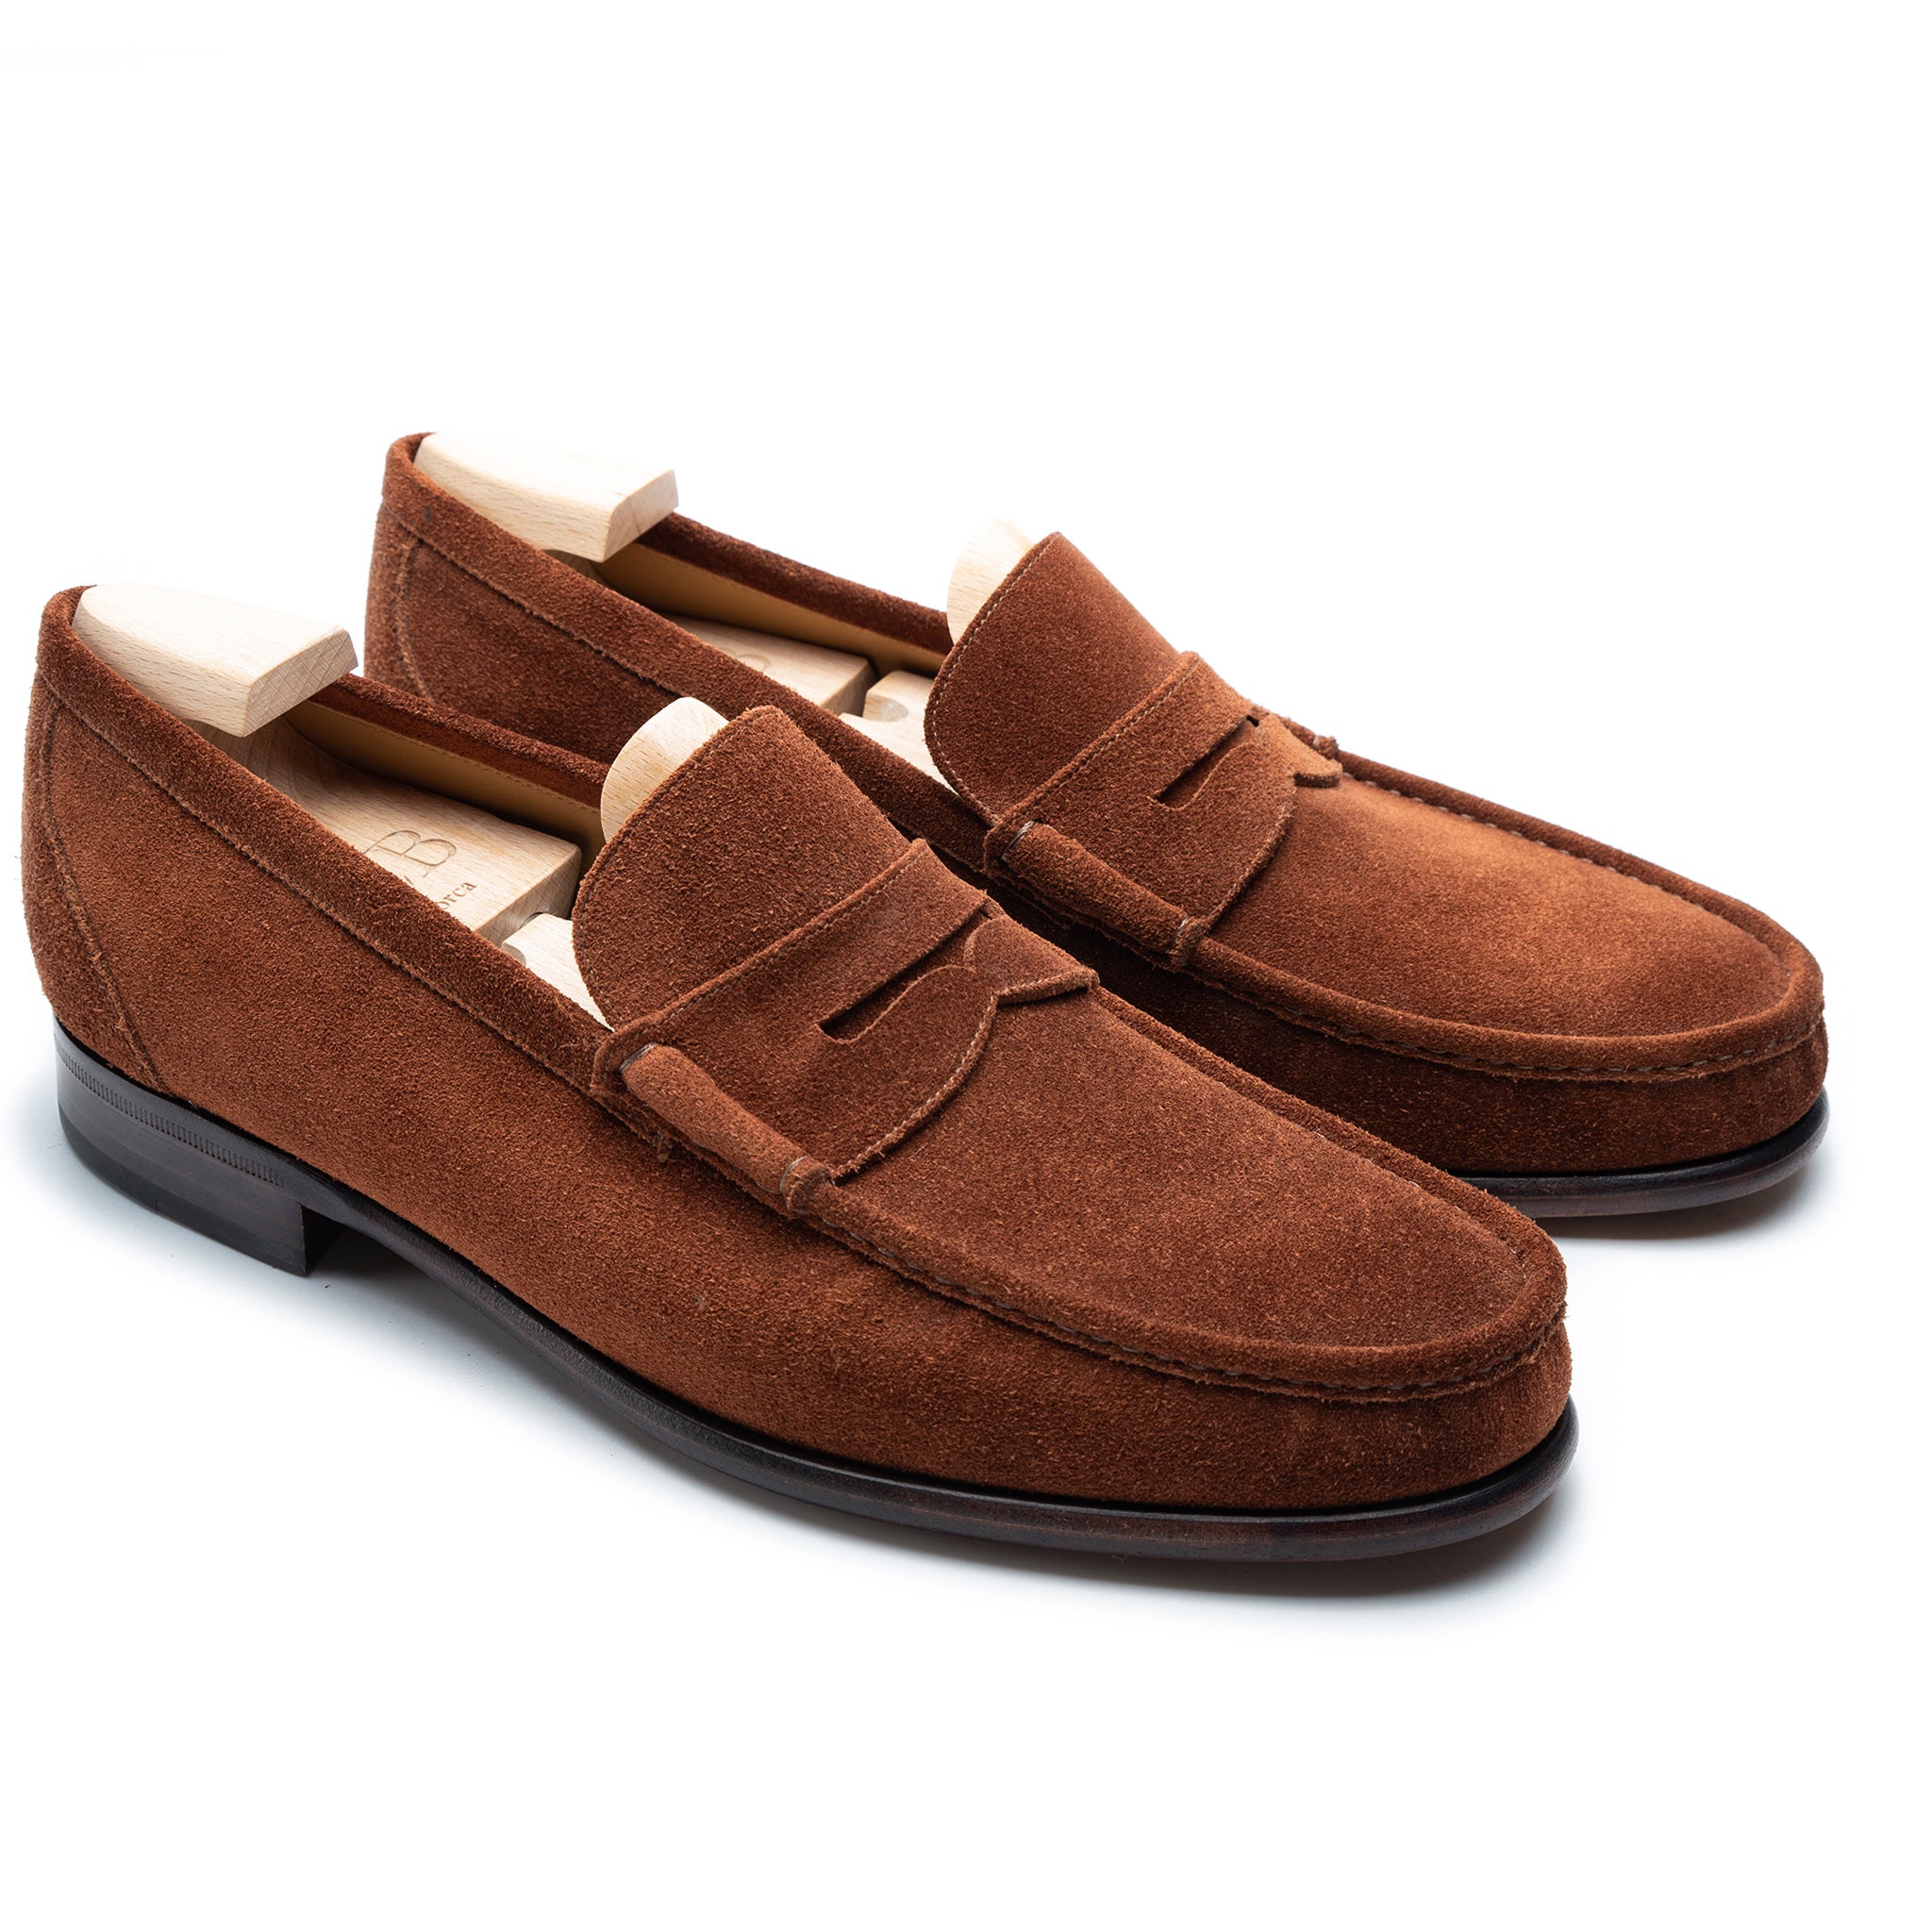 TLB Mallorca Oxford loafers | Men's Oxford shoes | Model 2510 suede ...